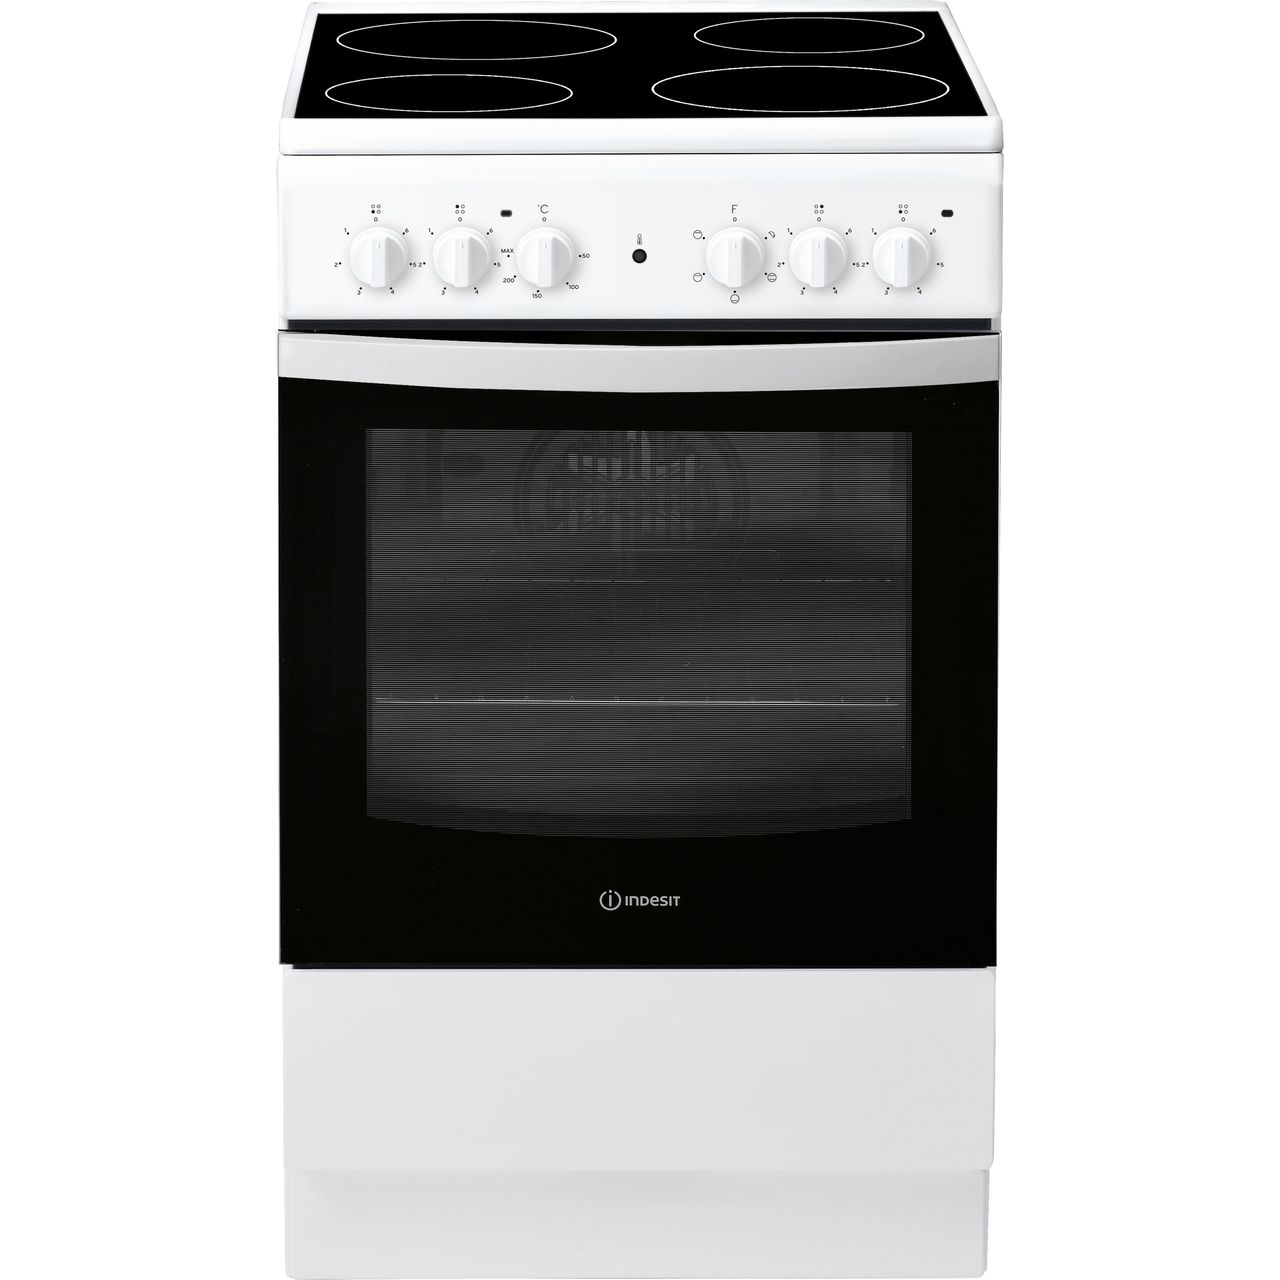 Indesit Cloe IS5V4KHW 50cm Electric Cooker with Ceramic Hob Review